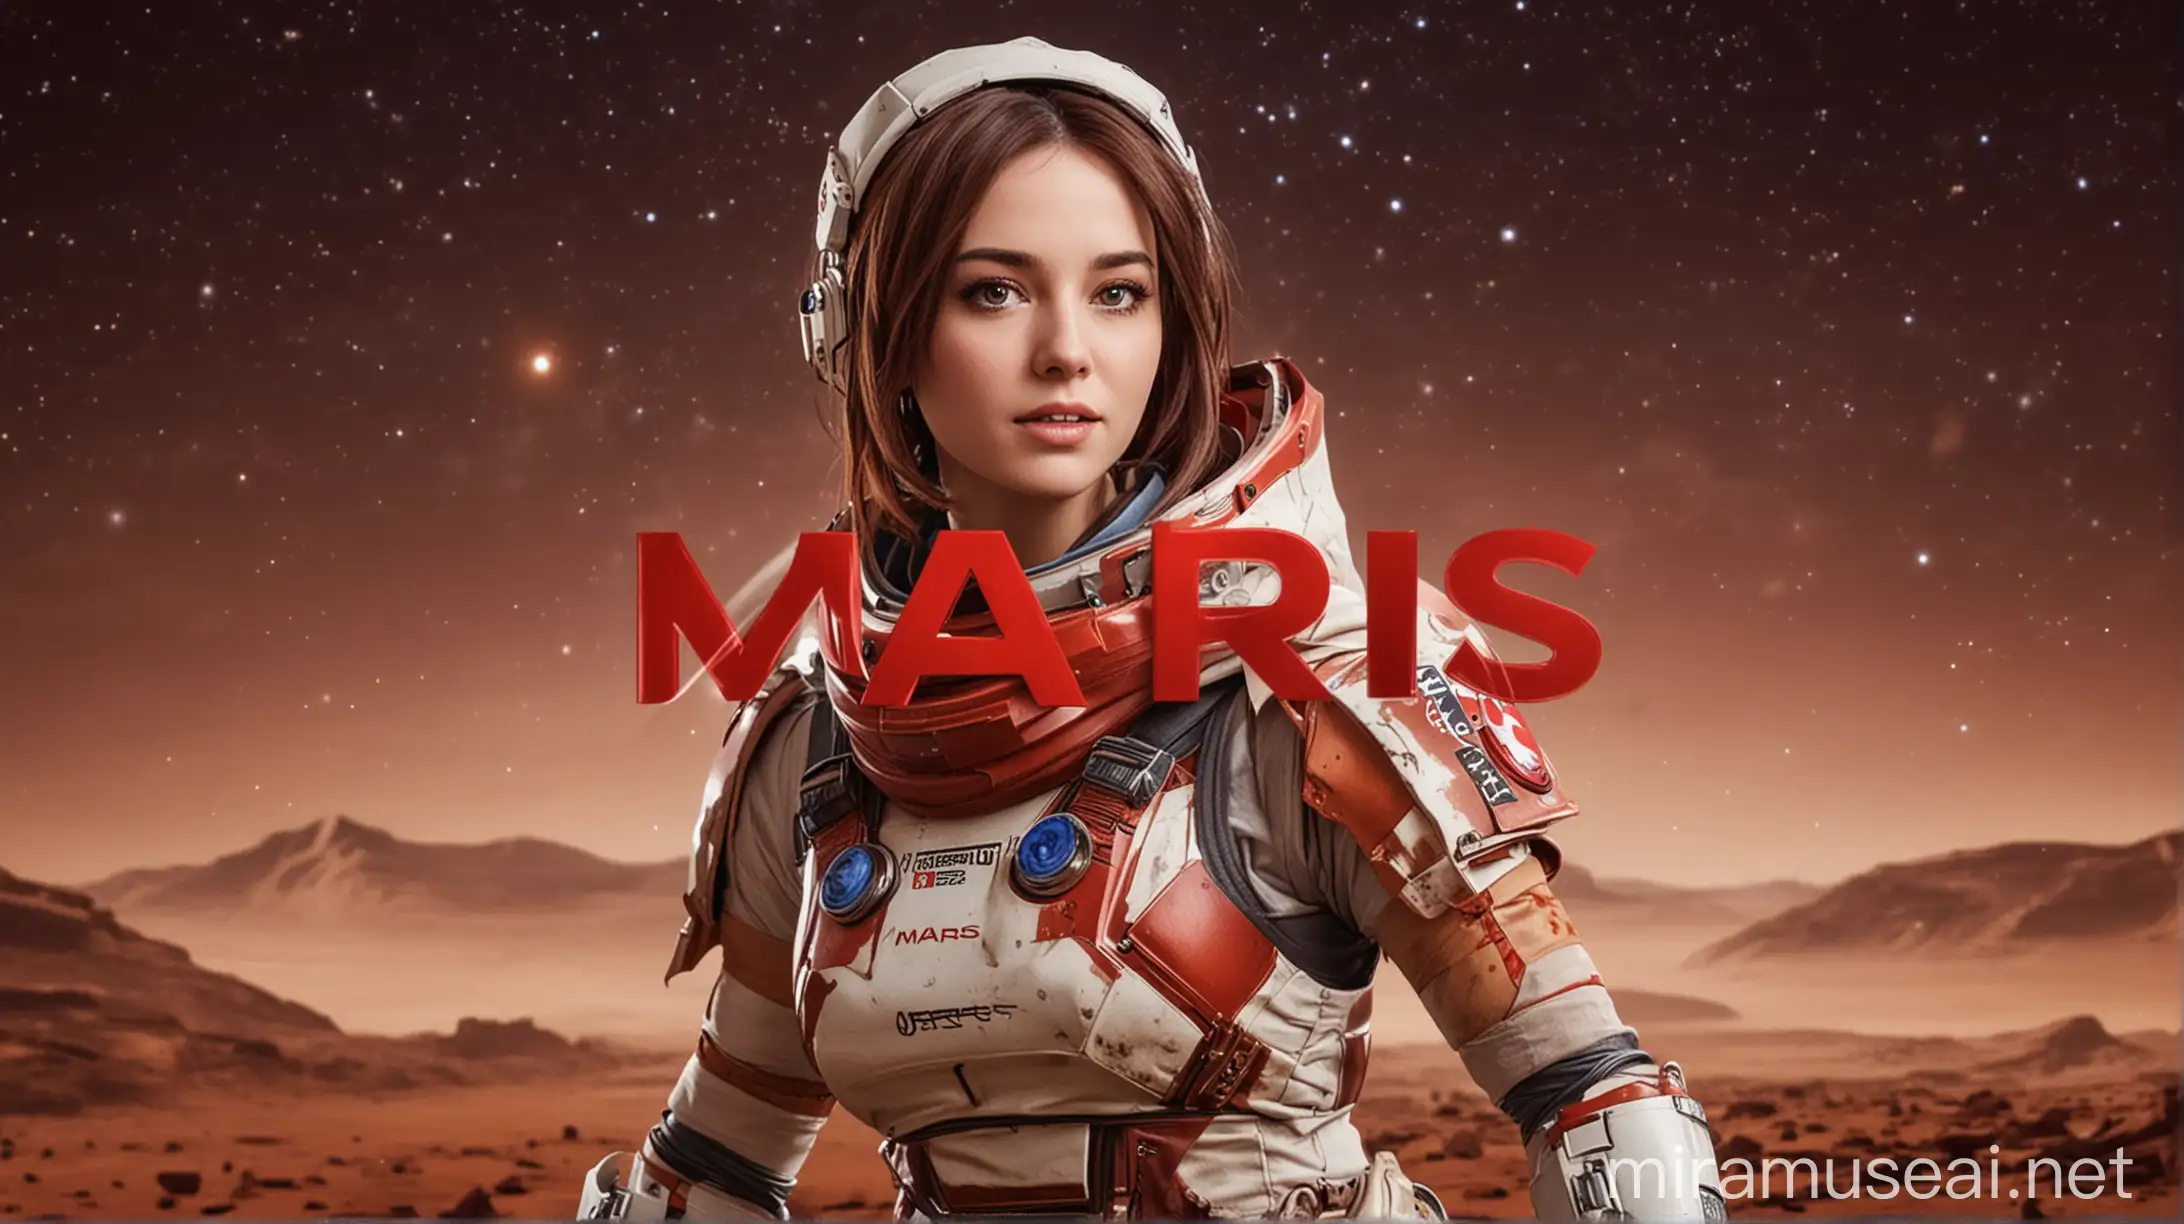 Cosplay Talking Head Video Background for Mars Brand